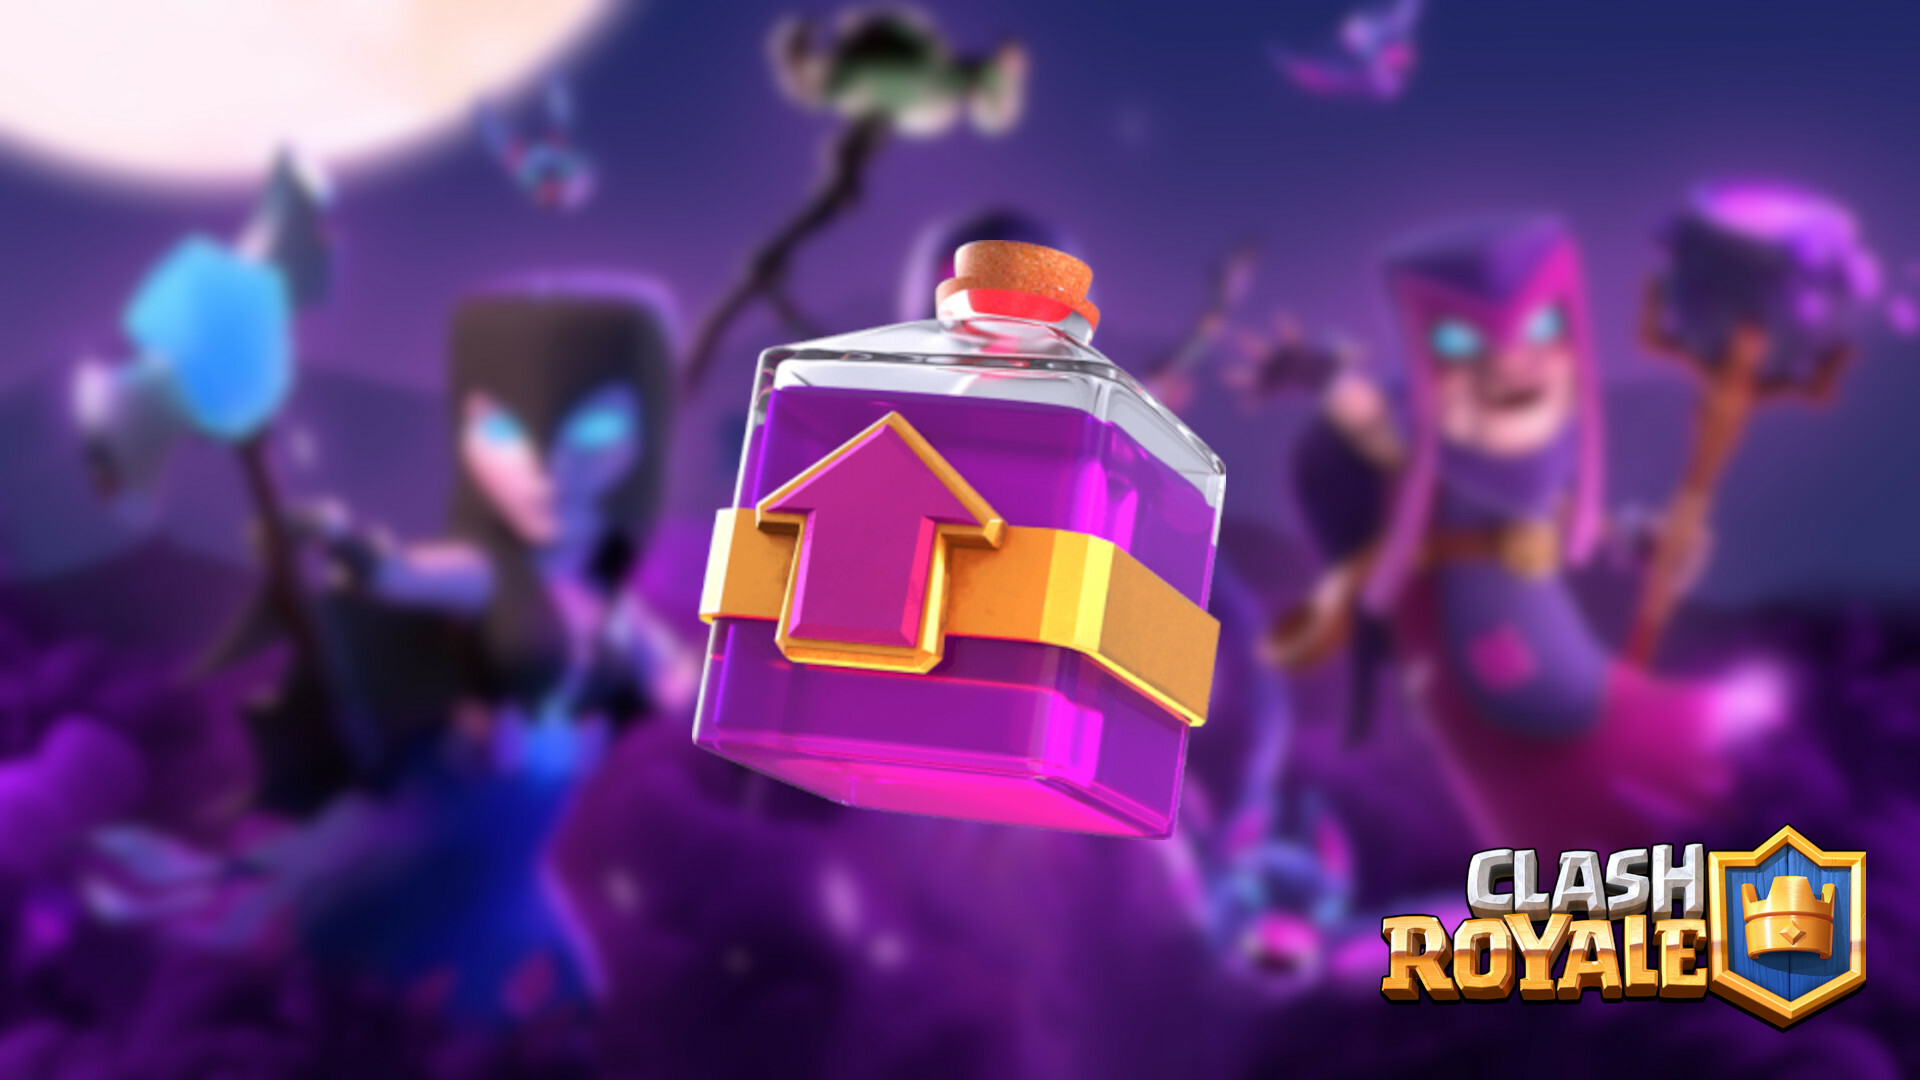 New Card Boost Potion Revealed In Clash Royale | MobileMatters